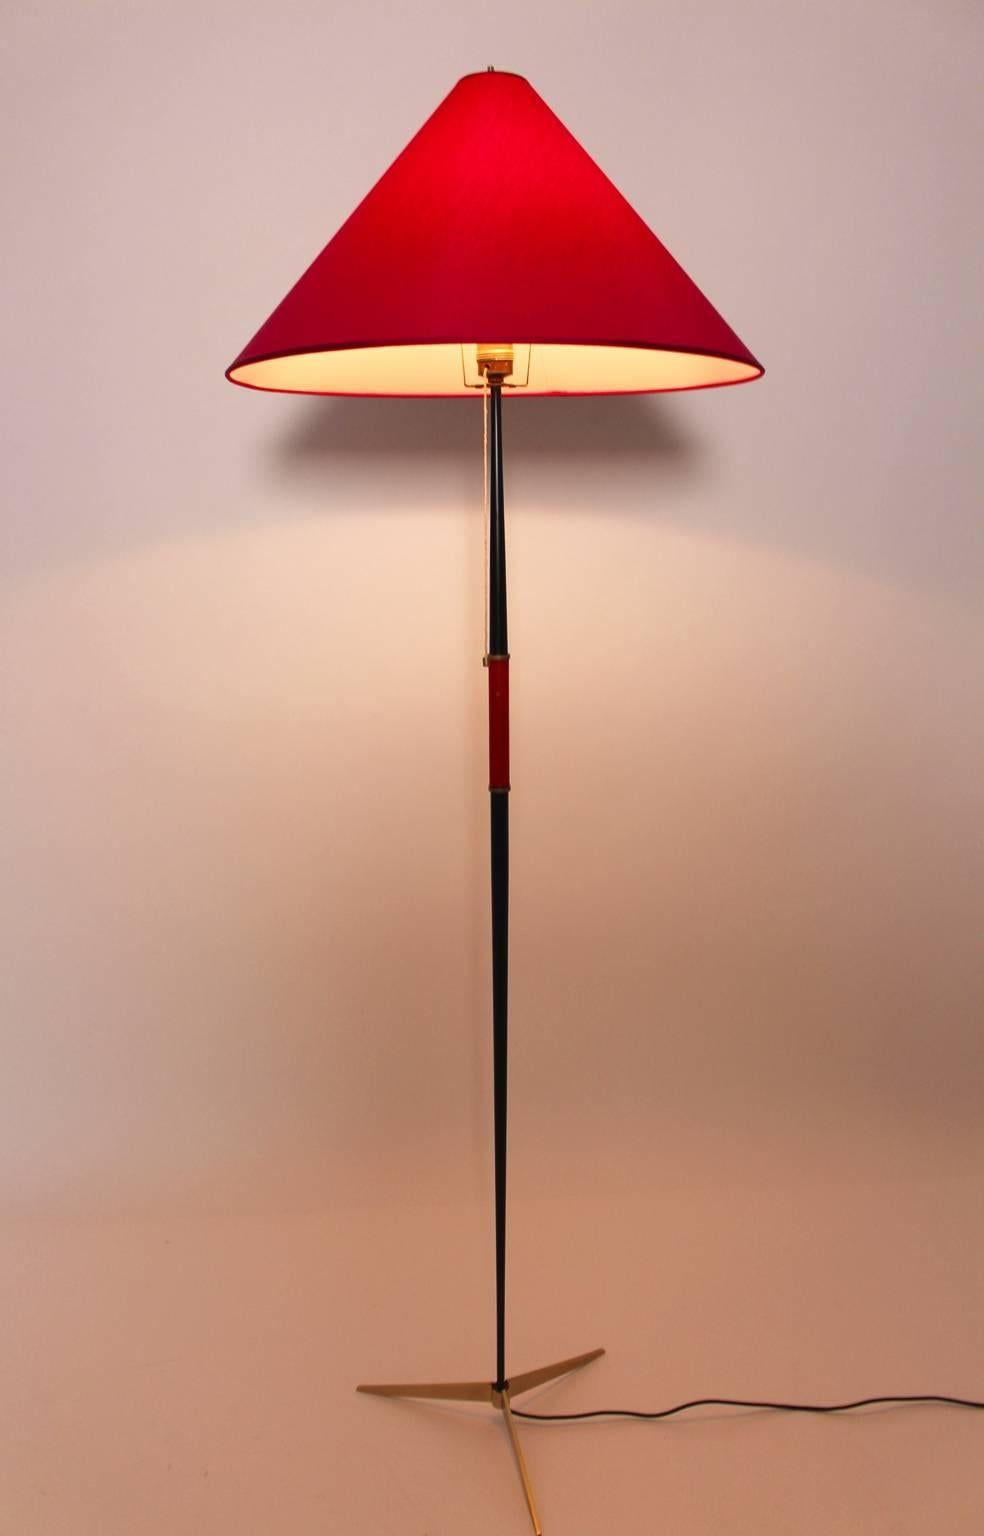 Mid century modern vintage floor lamp designed and executed by J. T. Kalmar Vienna, circa 1960 from brass and metal.
The Floor Lamp consists of a tripod brass foot and a conical black lacquered metal tube. Also the floor lamp features a red leather